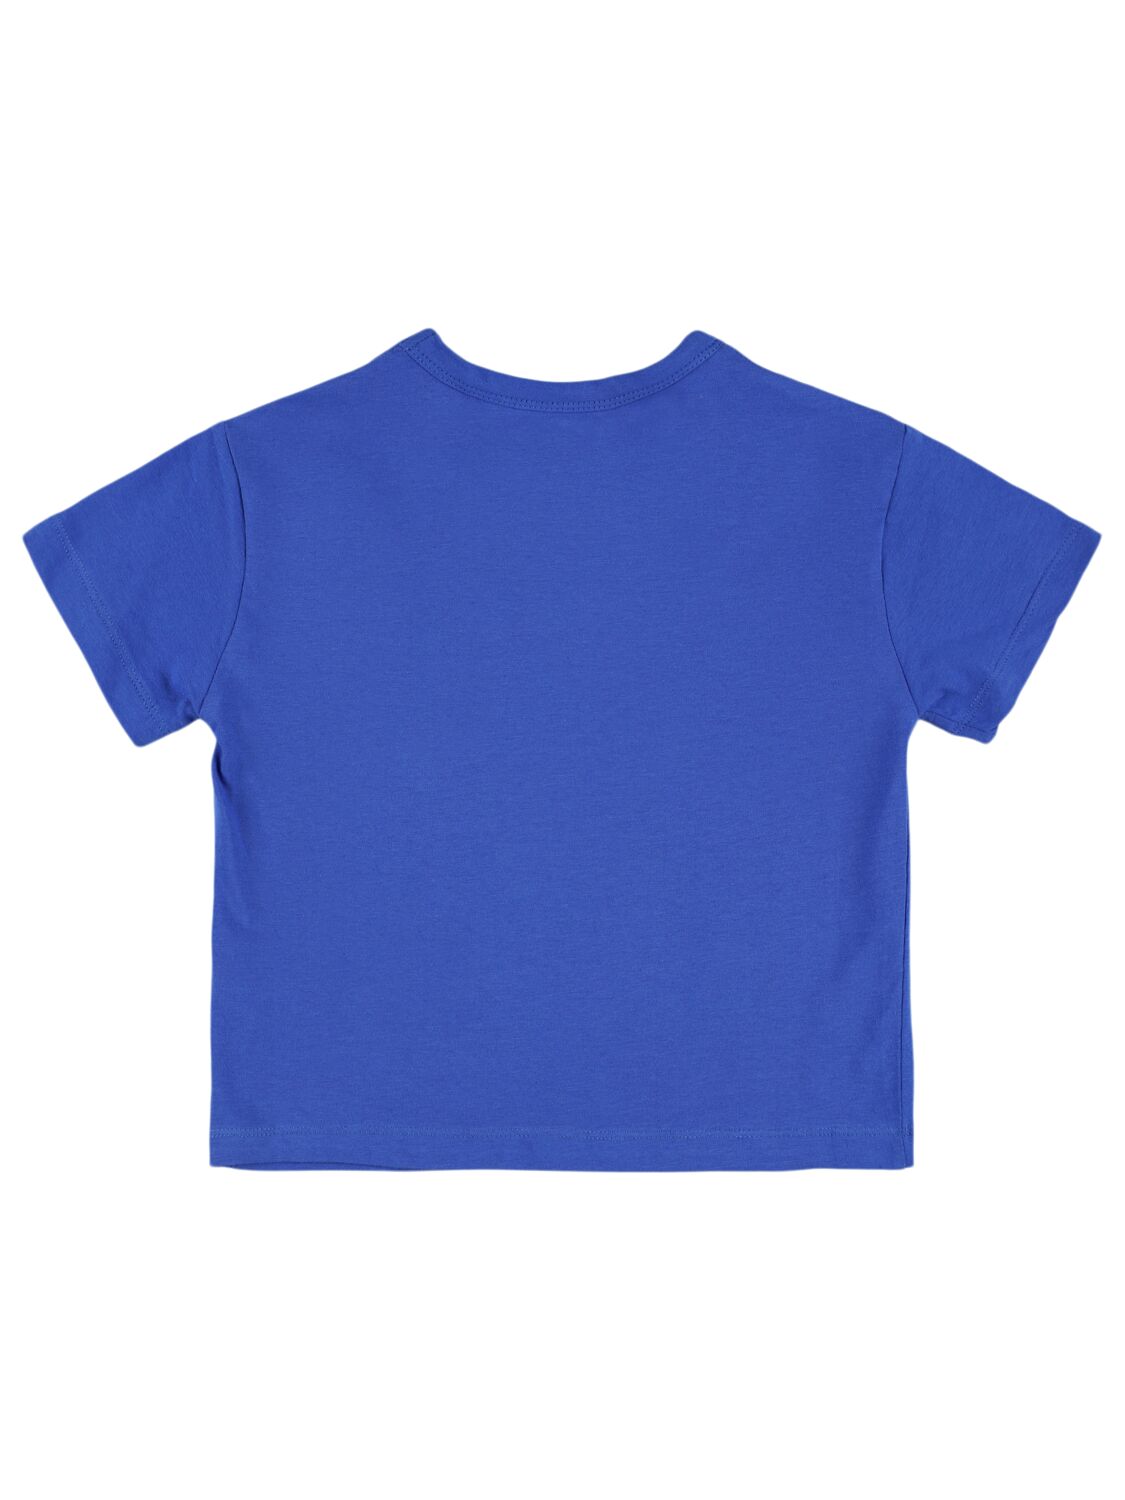 Shop Tiny Cottons Printed Organic Cotton T-shirt In Blue